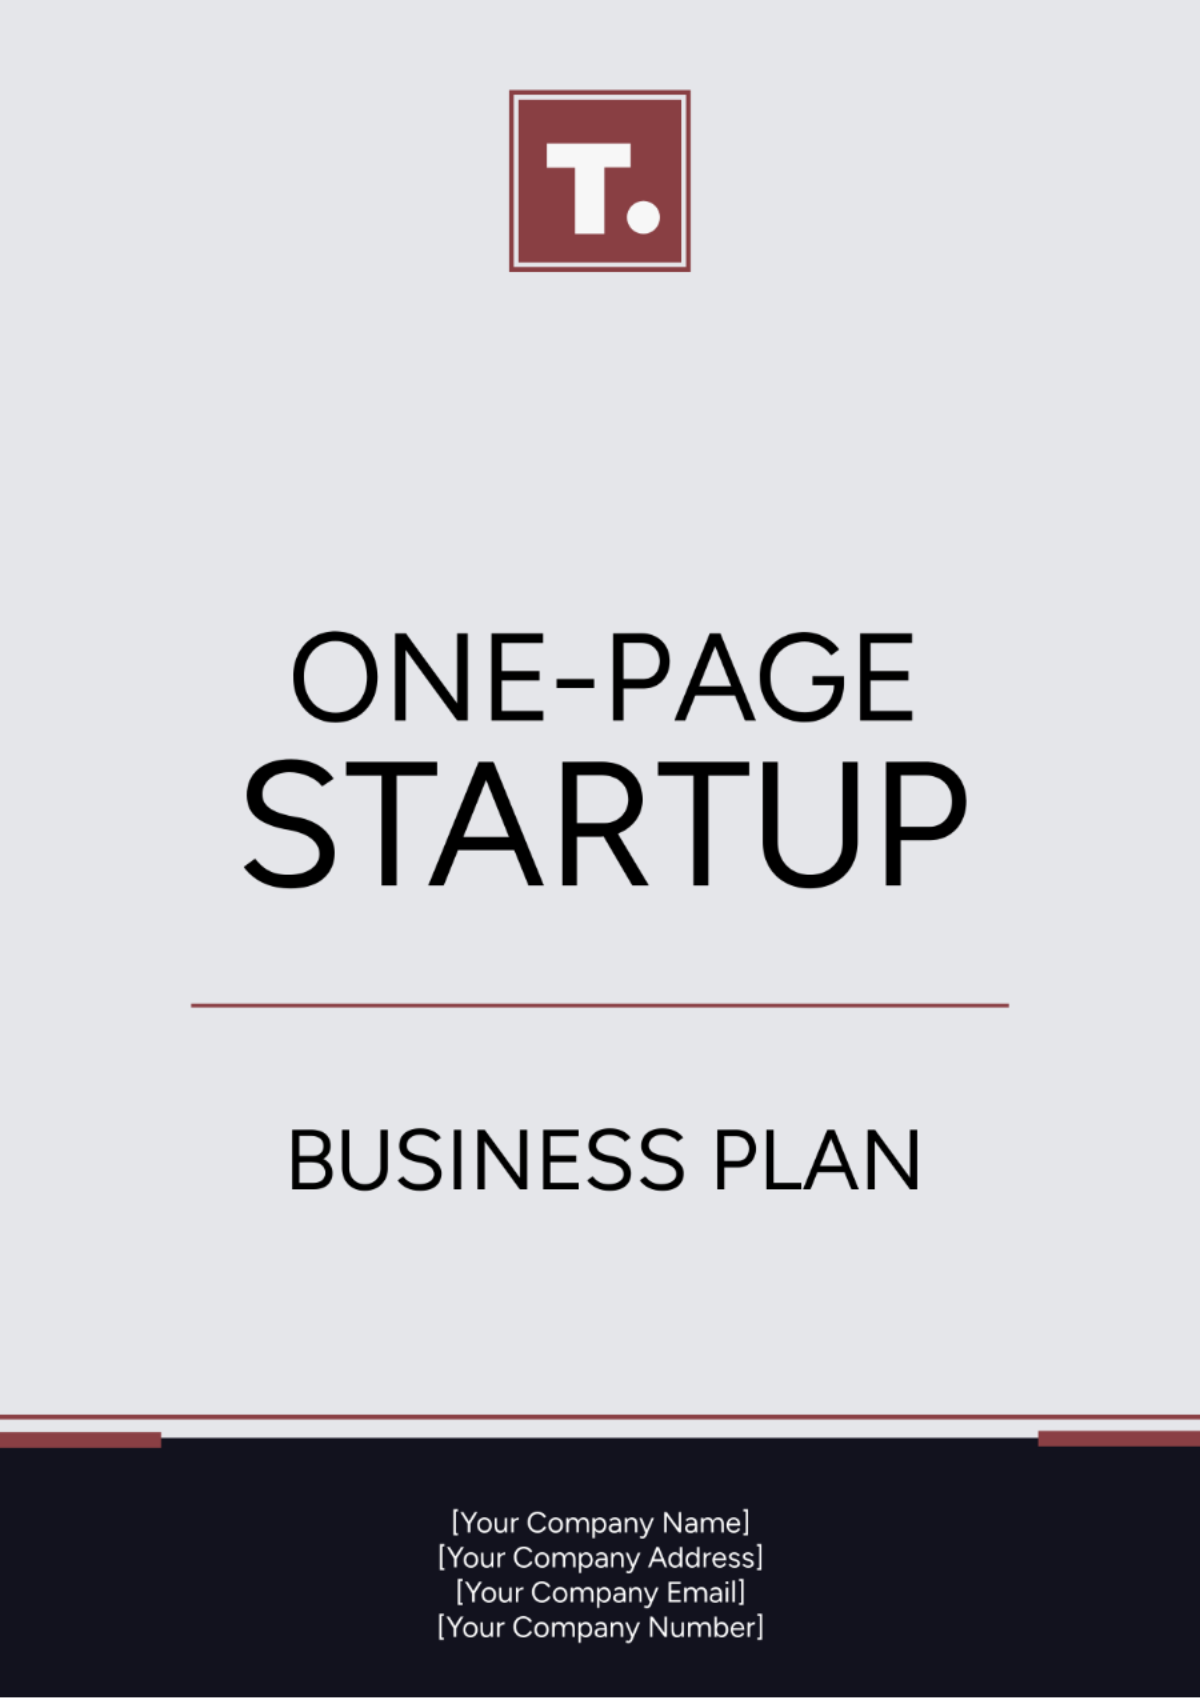 Free One-Page Startup Business Plan Template